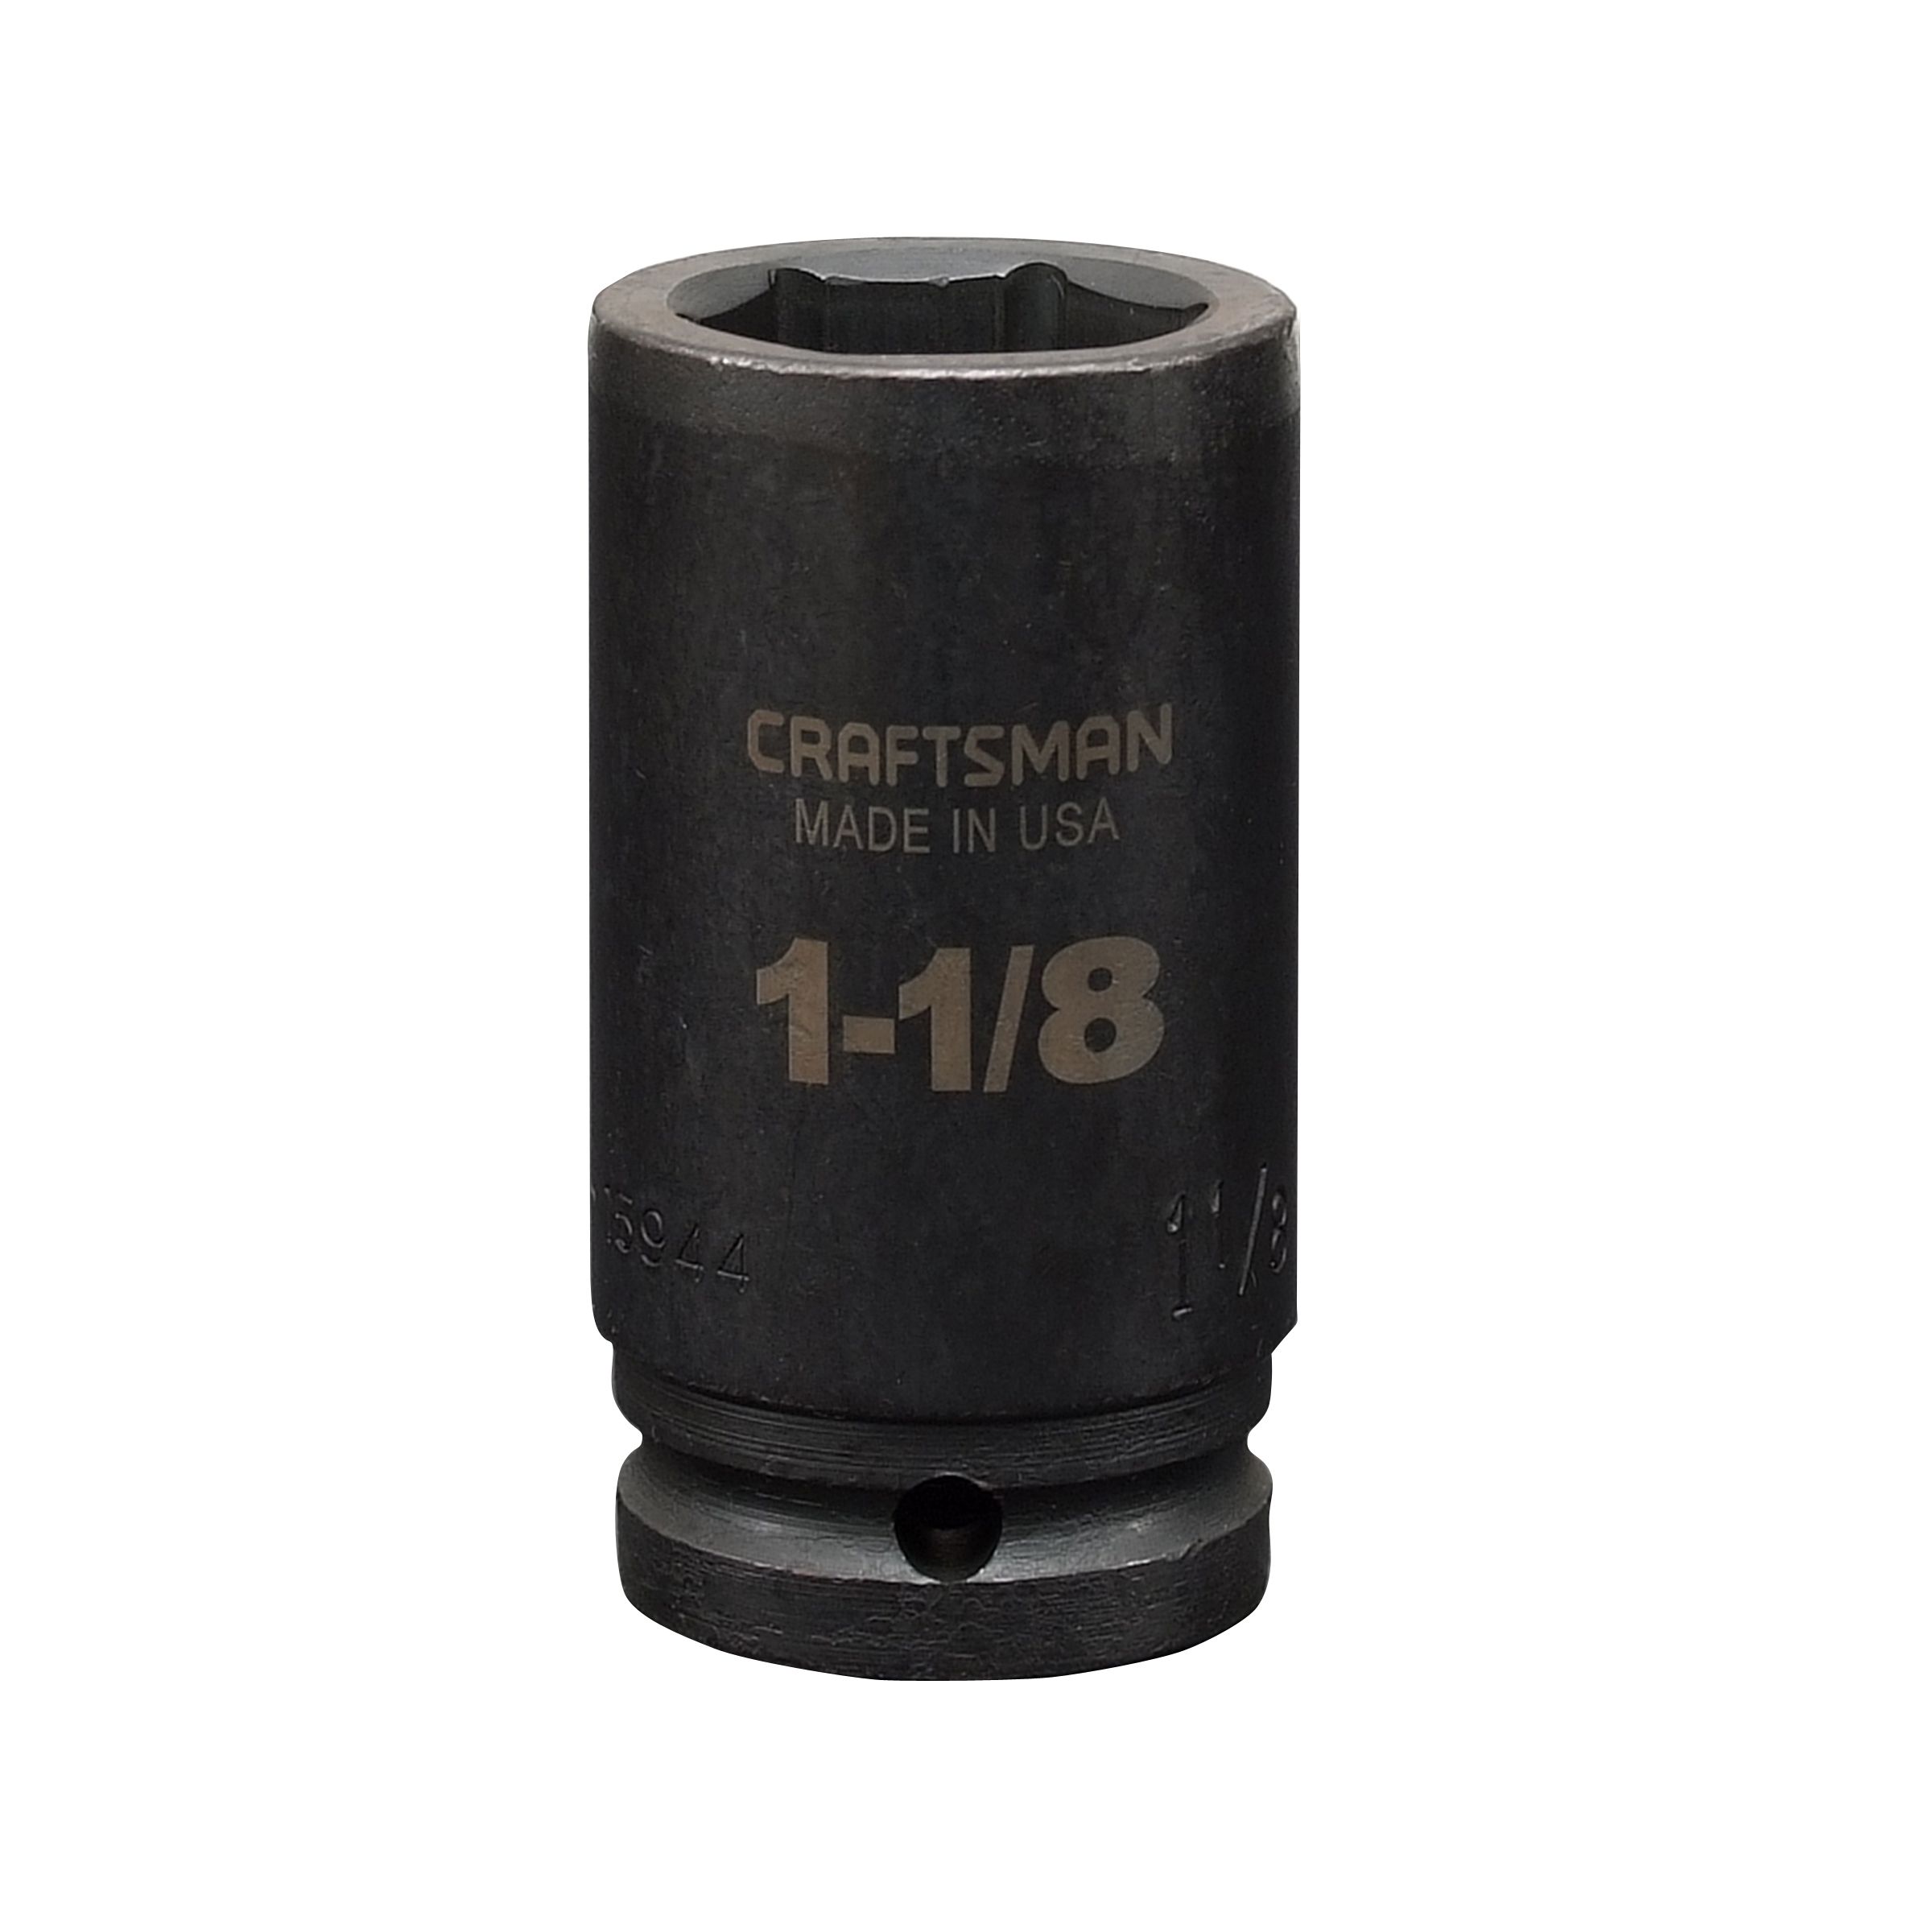 Craftsman 1-1/8 in. Easy-To-Read Impact Socket, 6 pt. Deep 3/4 in. Drive